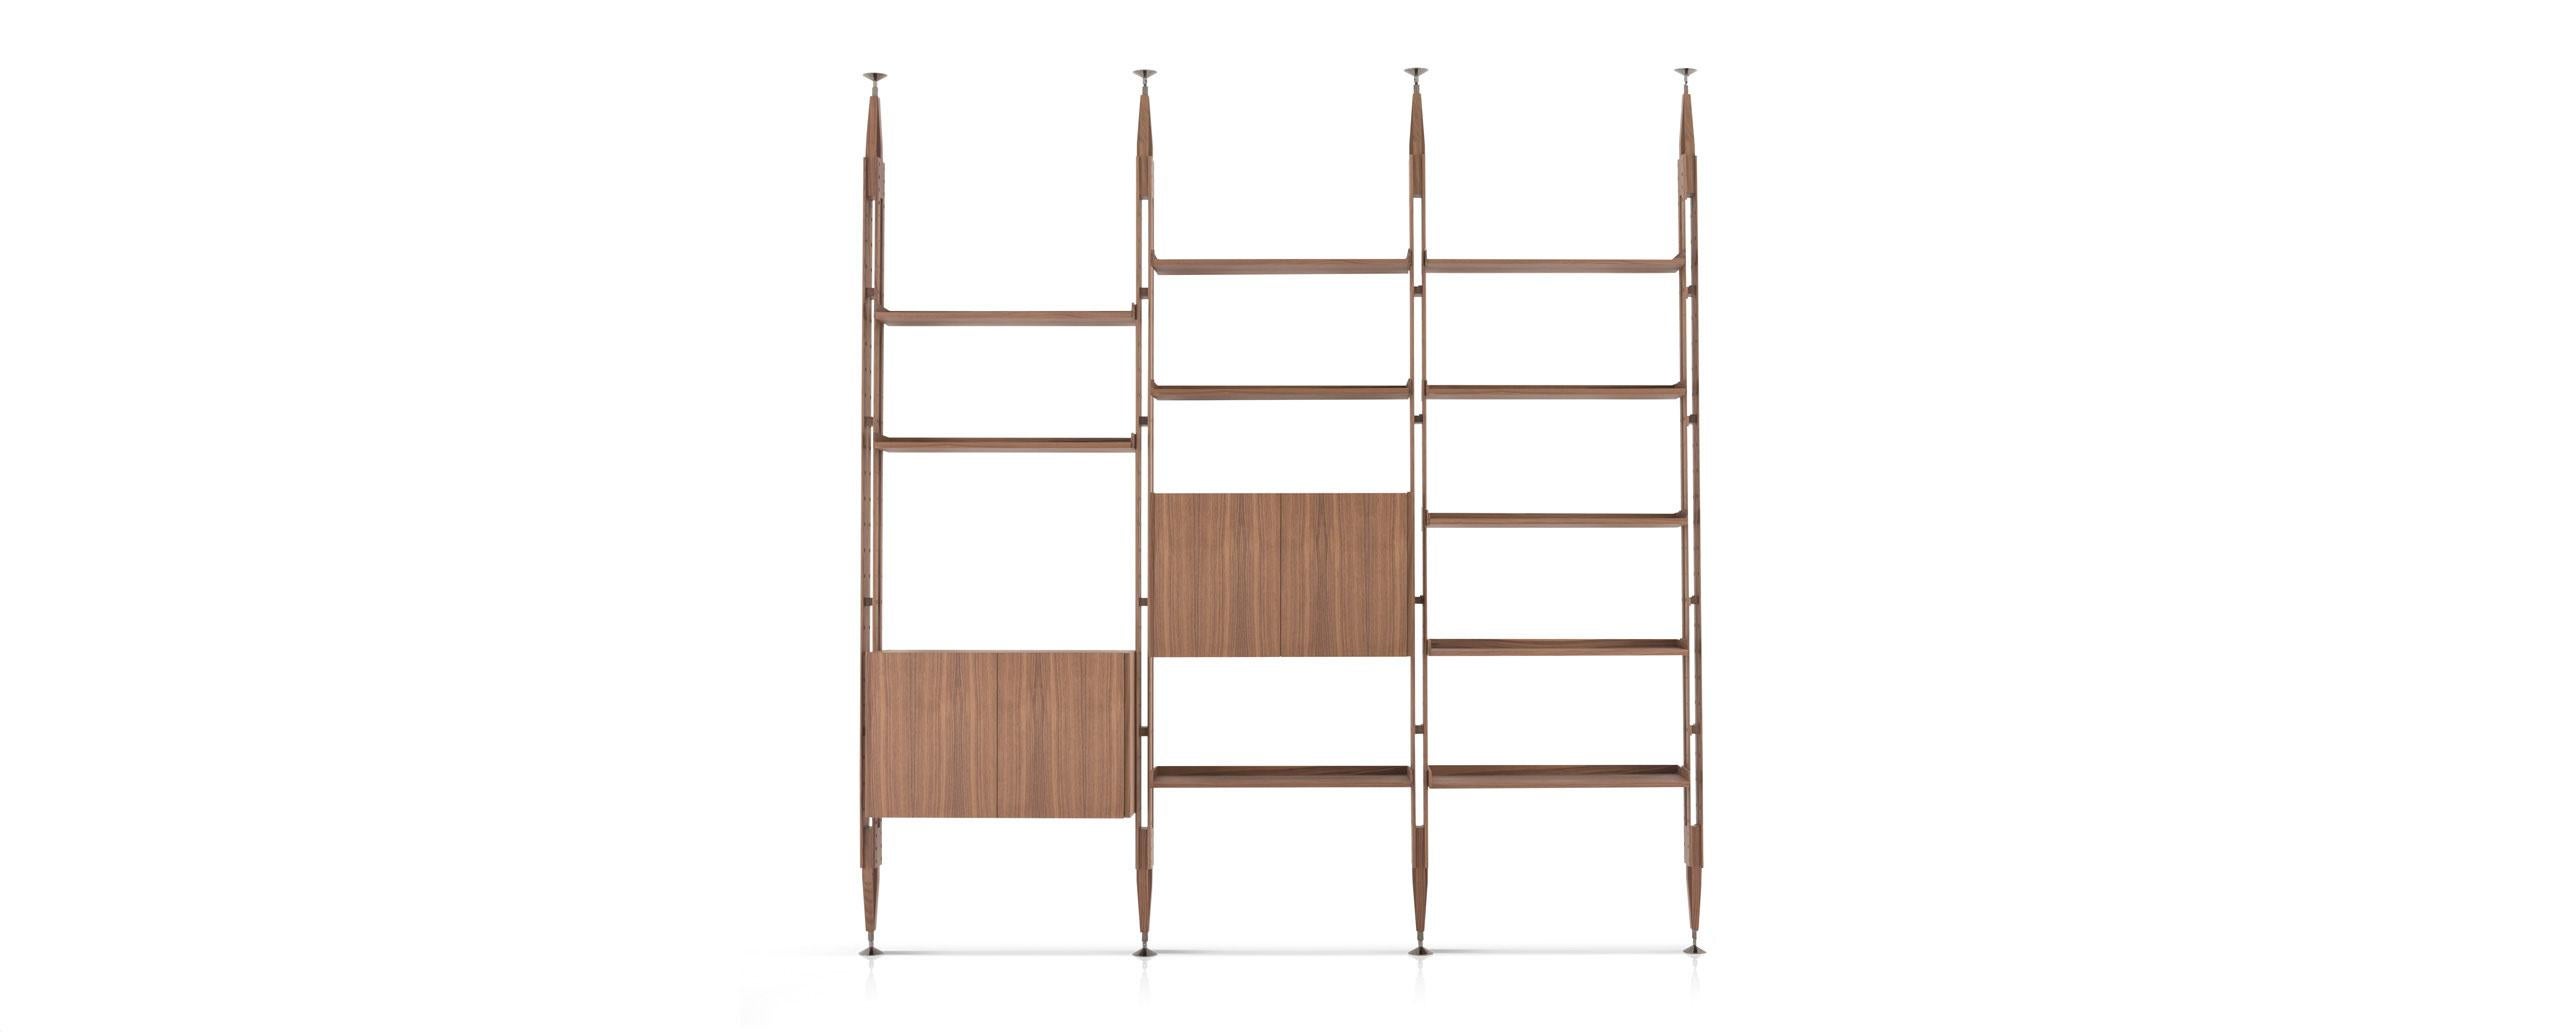 Modular bookcase designed by Franco Albini in 1957. Relaunched in 2008.
Manufactured by Cassina in Italy.

An extremely flexible bookcase, with myriad modular options, suited to being against a wall or as a room partition. Franco Albini designed